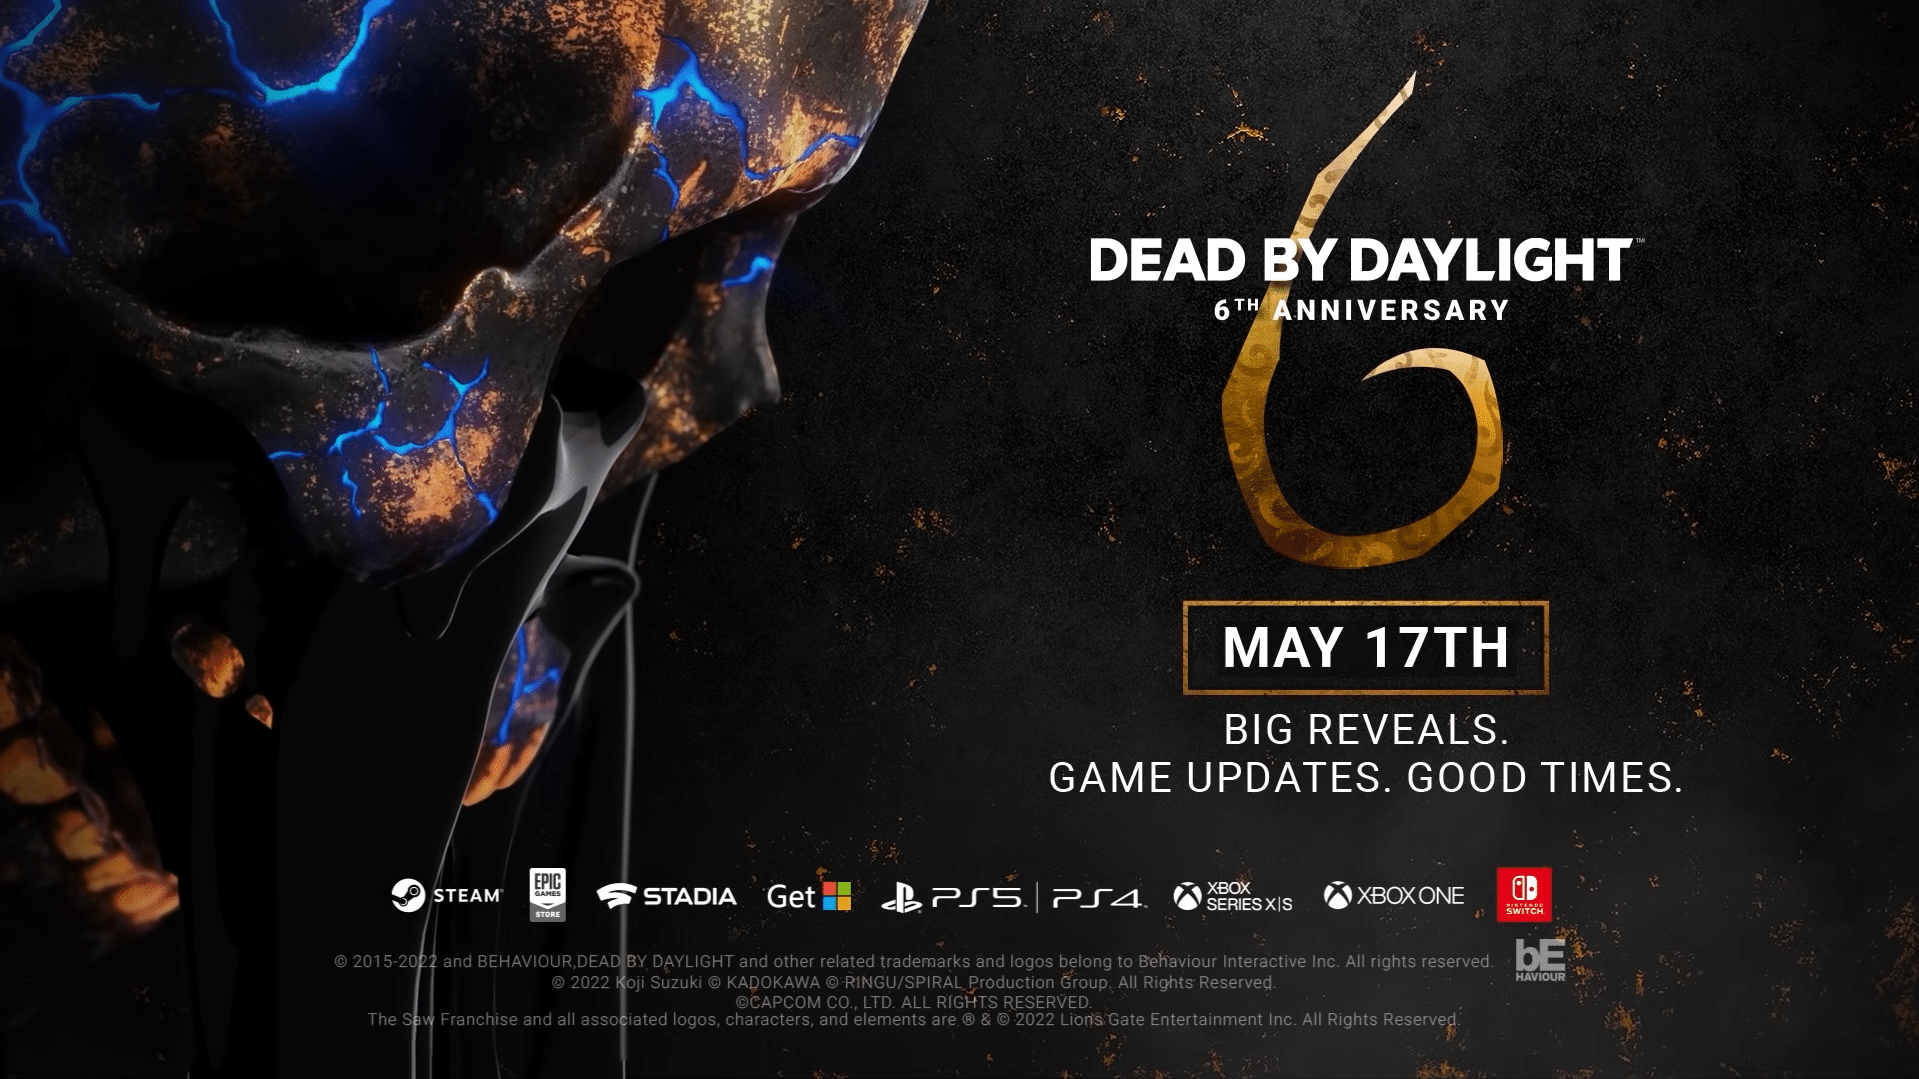 Dead by Daylight 6th Anniversary Trailer Teases Big Reveals for the May 17 Broadcast